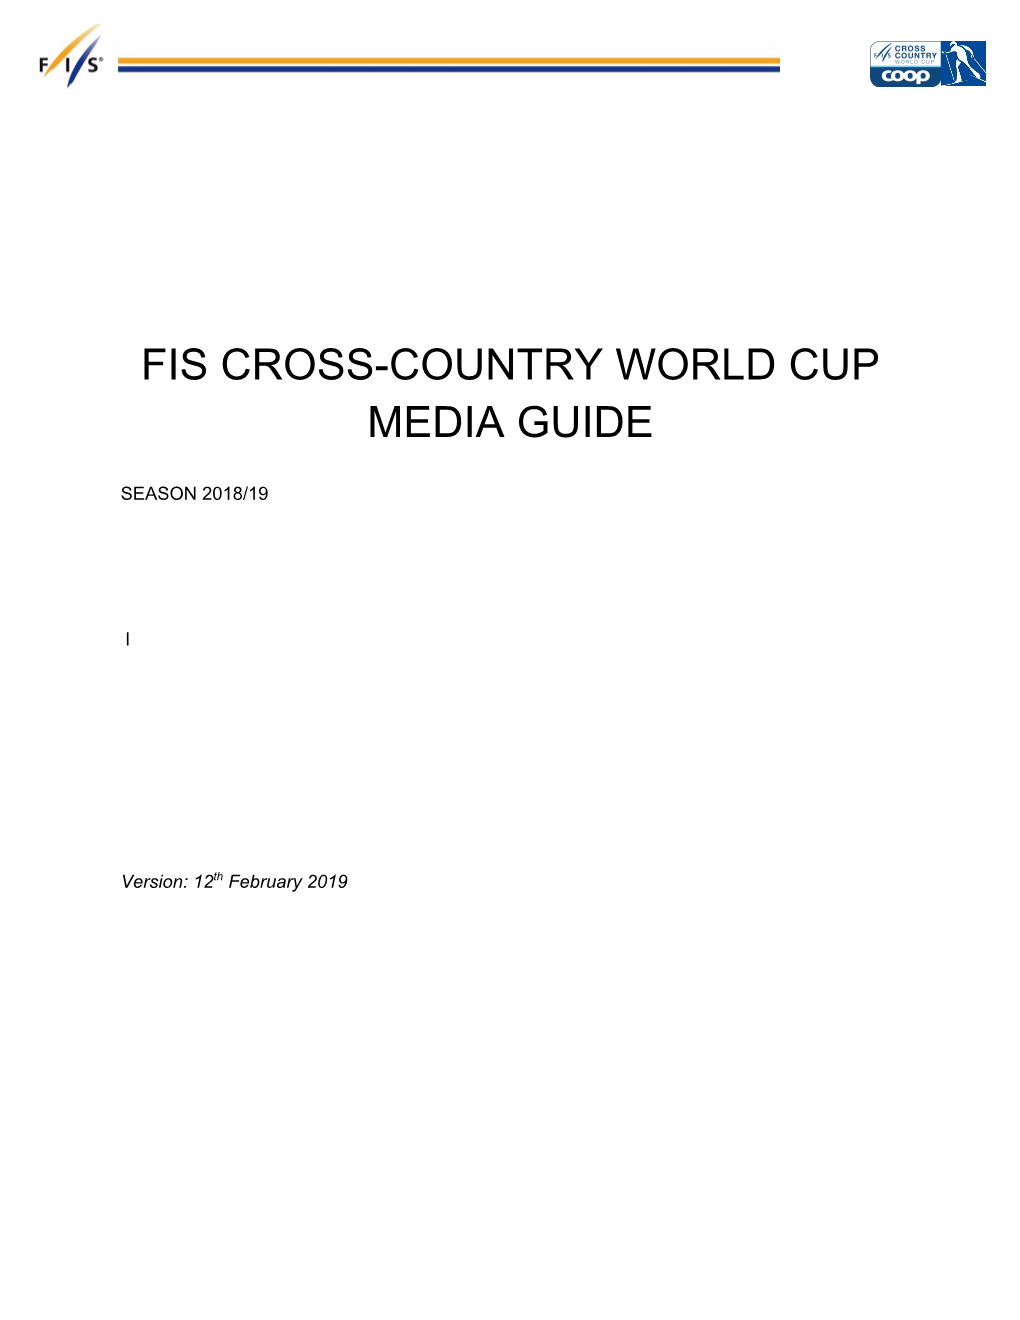 Fis Cross-Country World Cup Media Guide